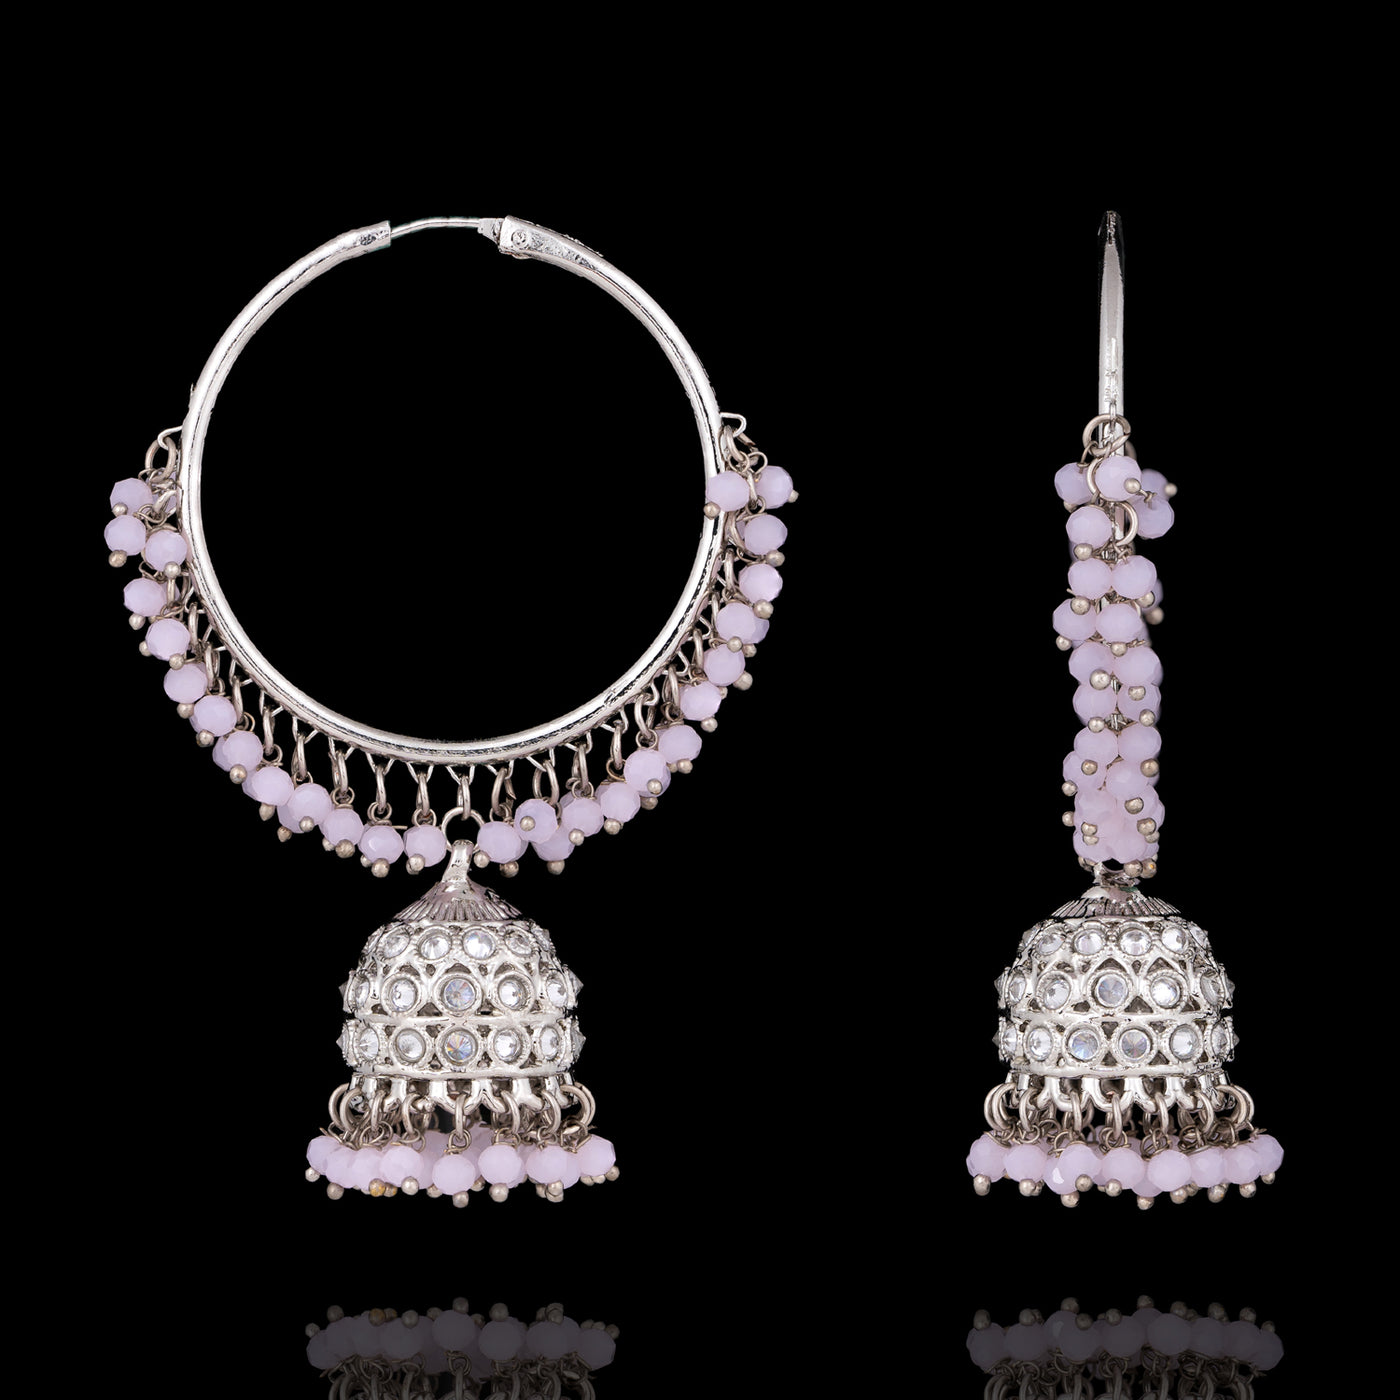 Neena Earrings - Available in 2 Colors